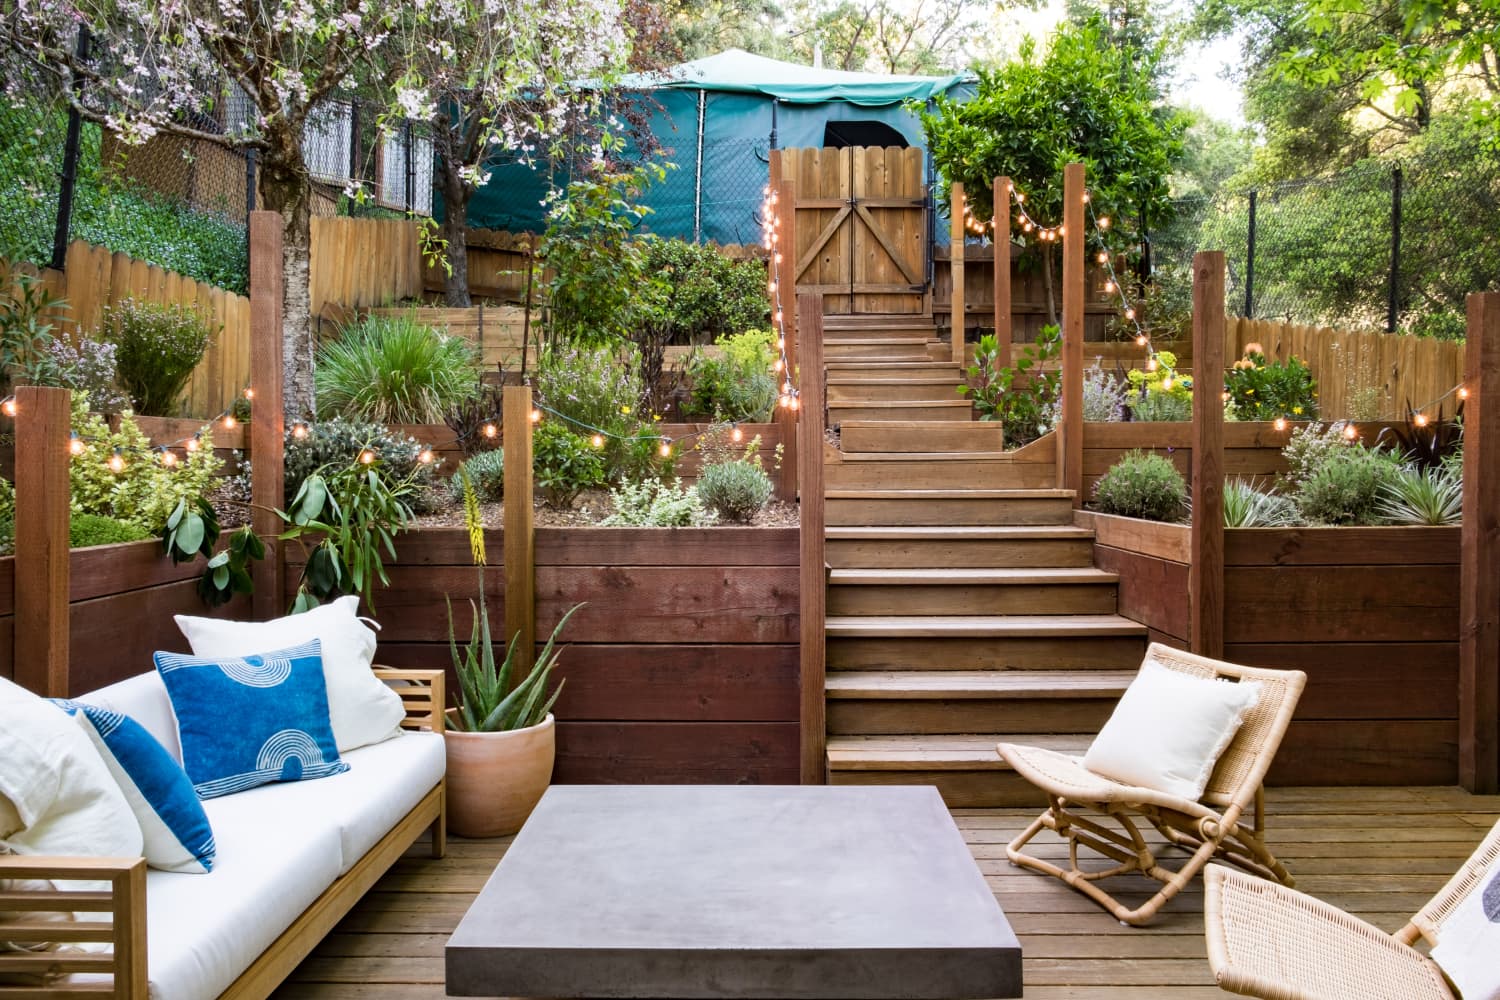 The Best Editor-Tested Outdoor Furniture: West Elm, Burrow, Pottery Barn